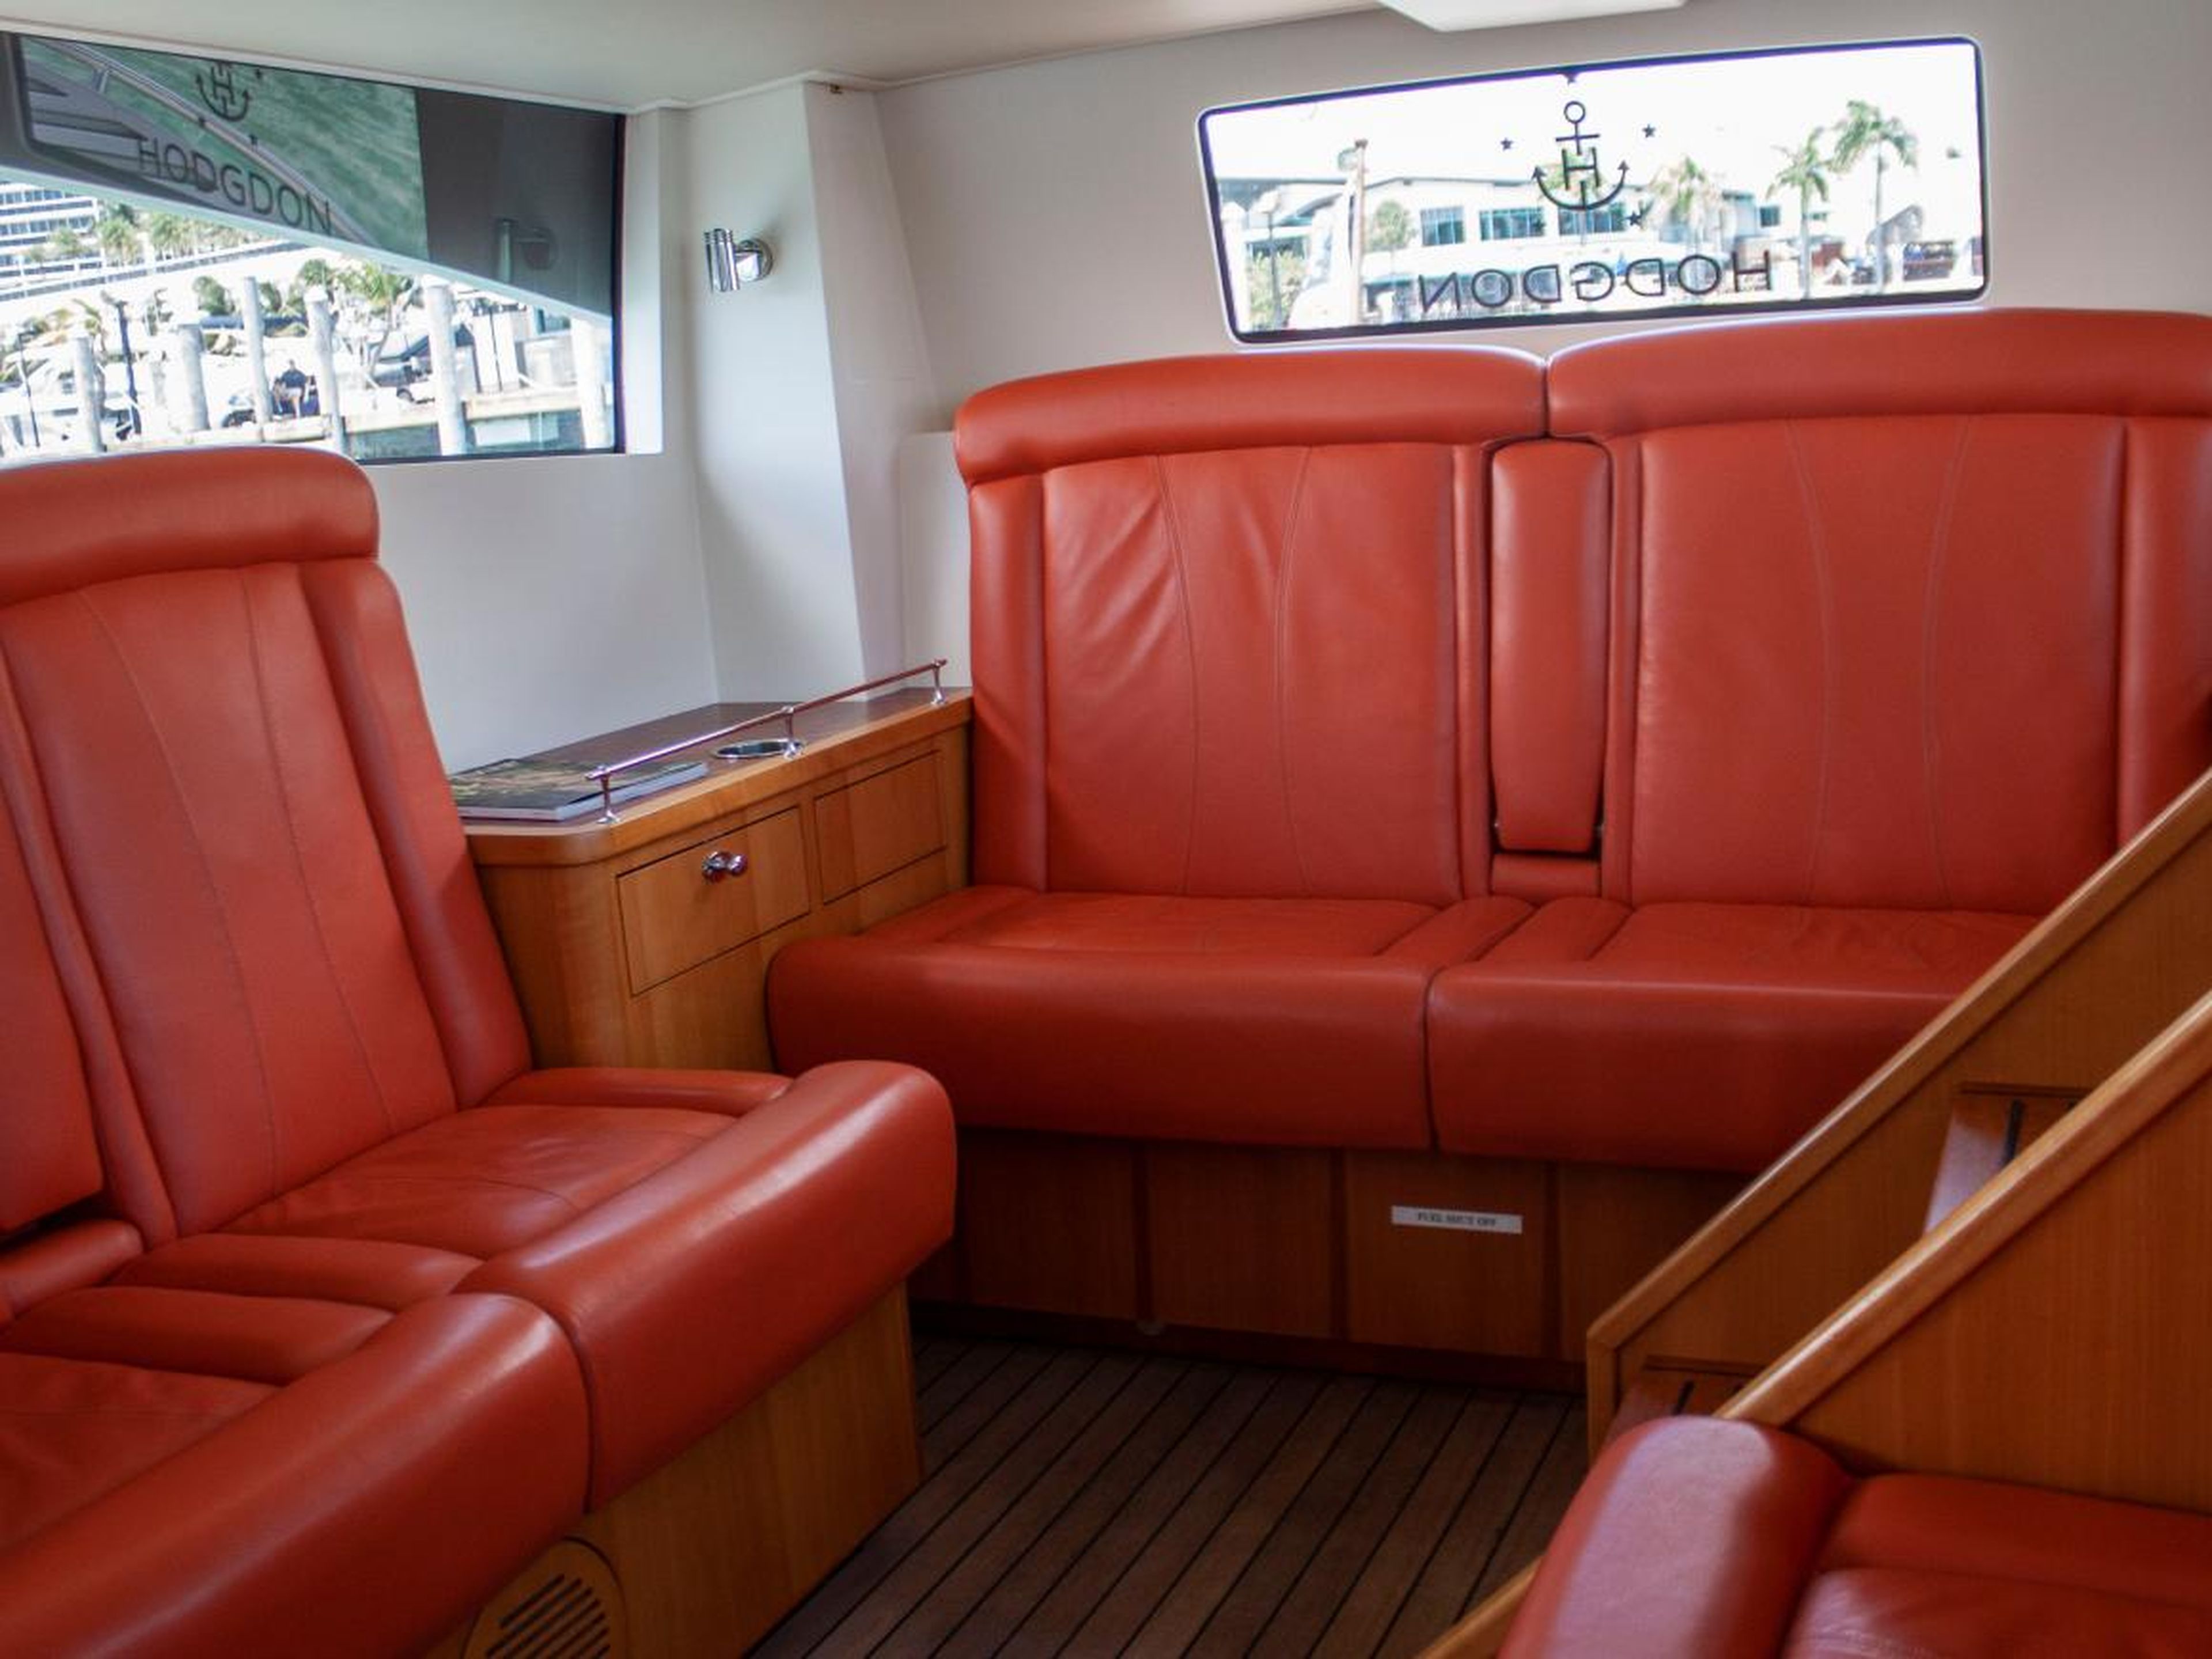 The boat was small yet luxurious, with 11 leather seats in an enclosed interior.